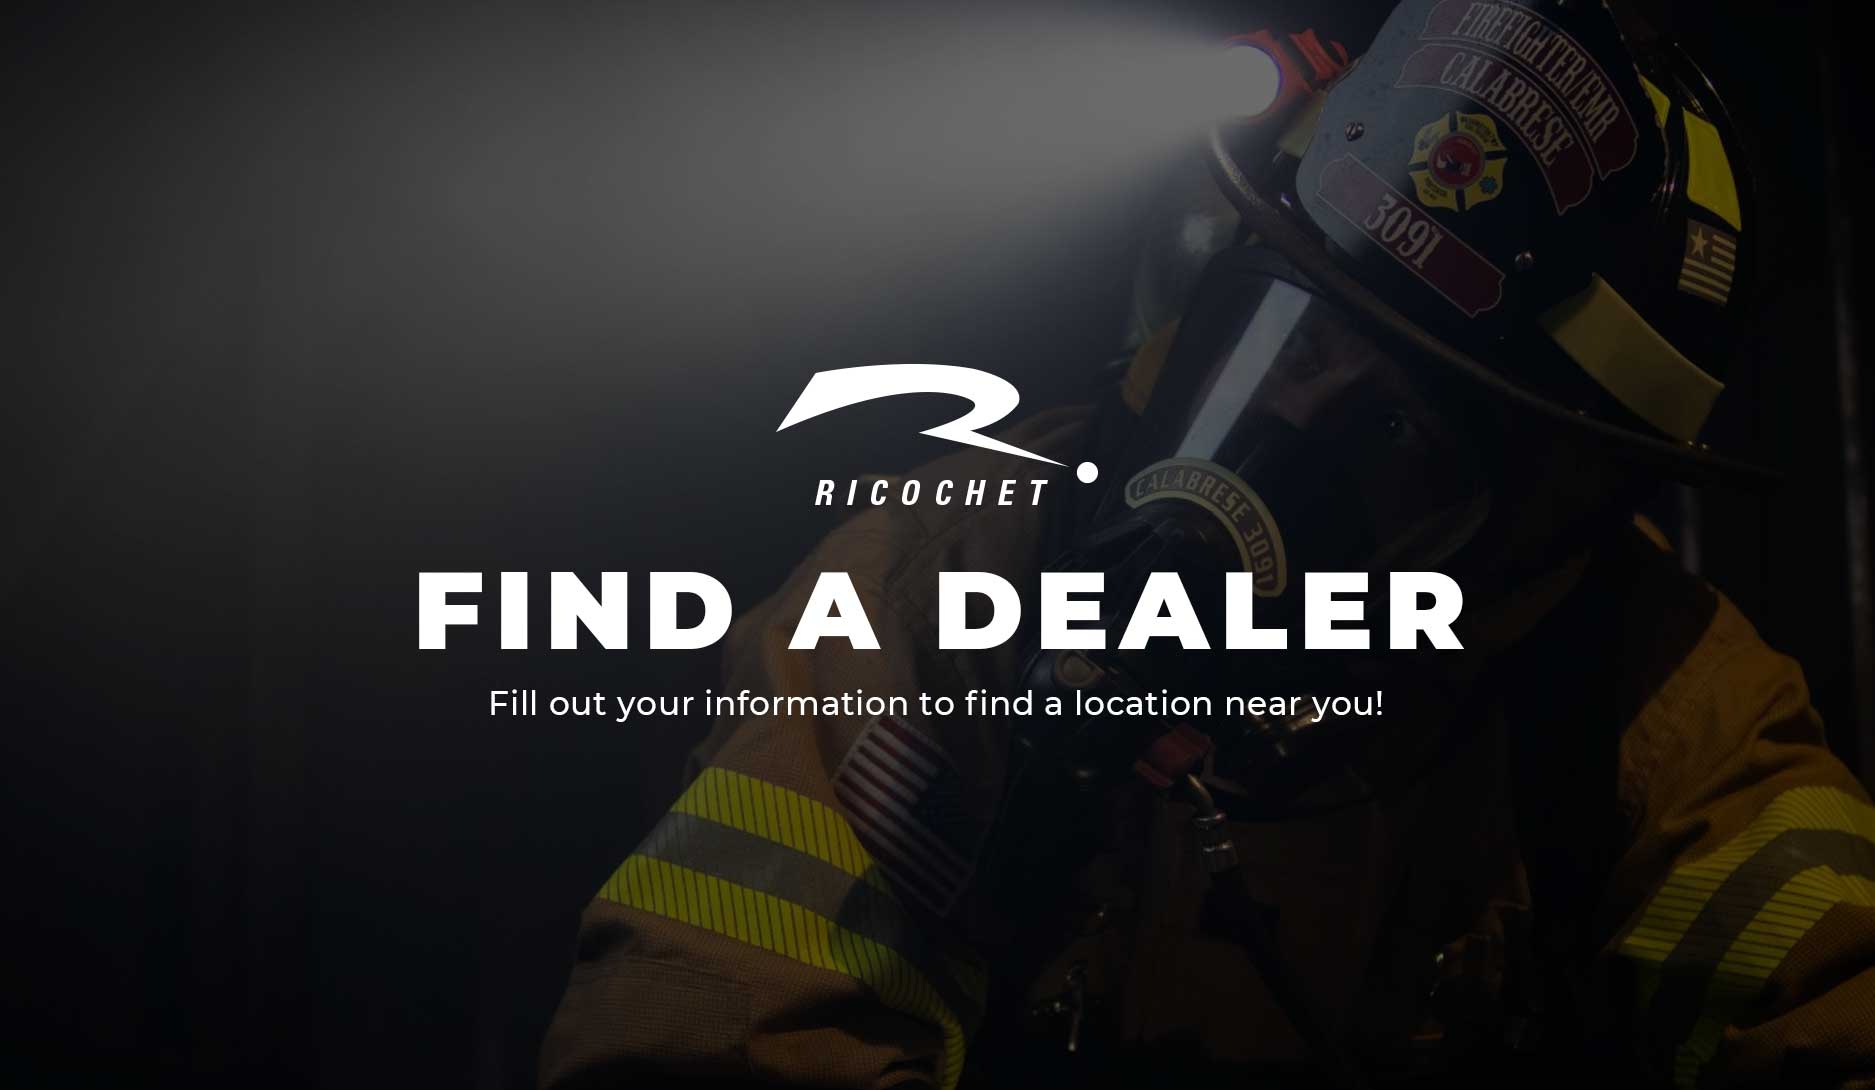 Find a Ricochet Dealer - Fill in your information to find a location near you